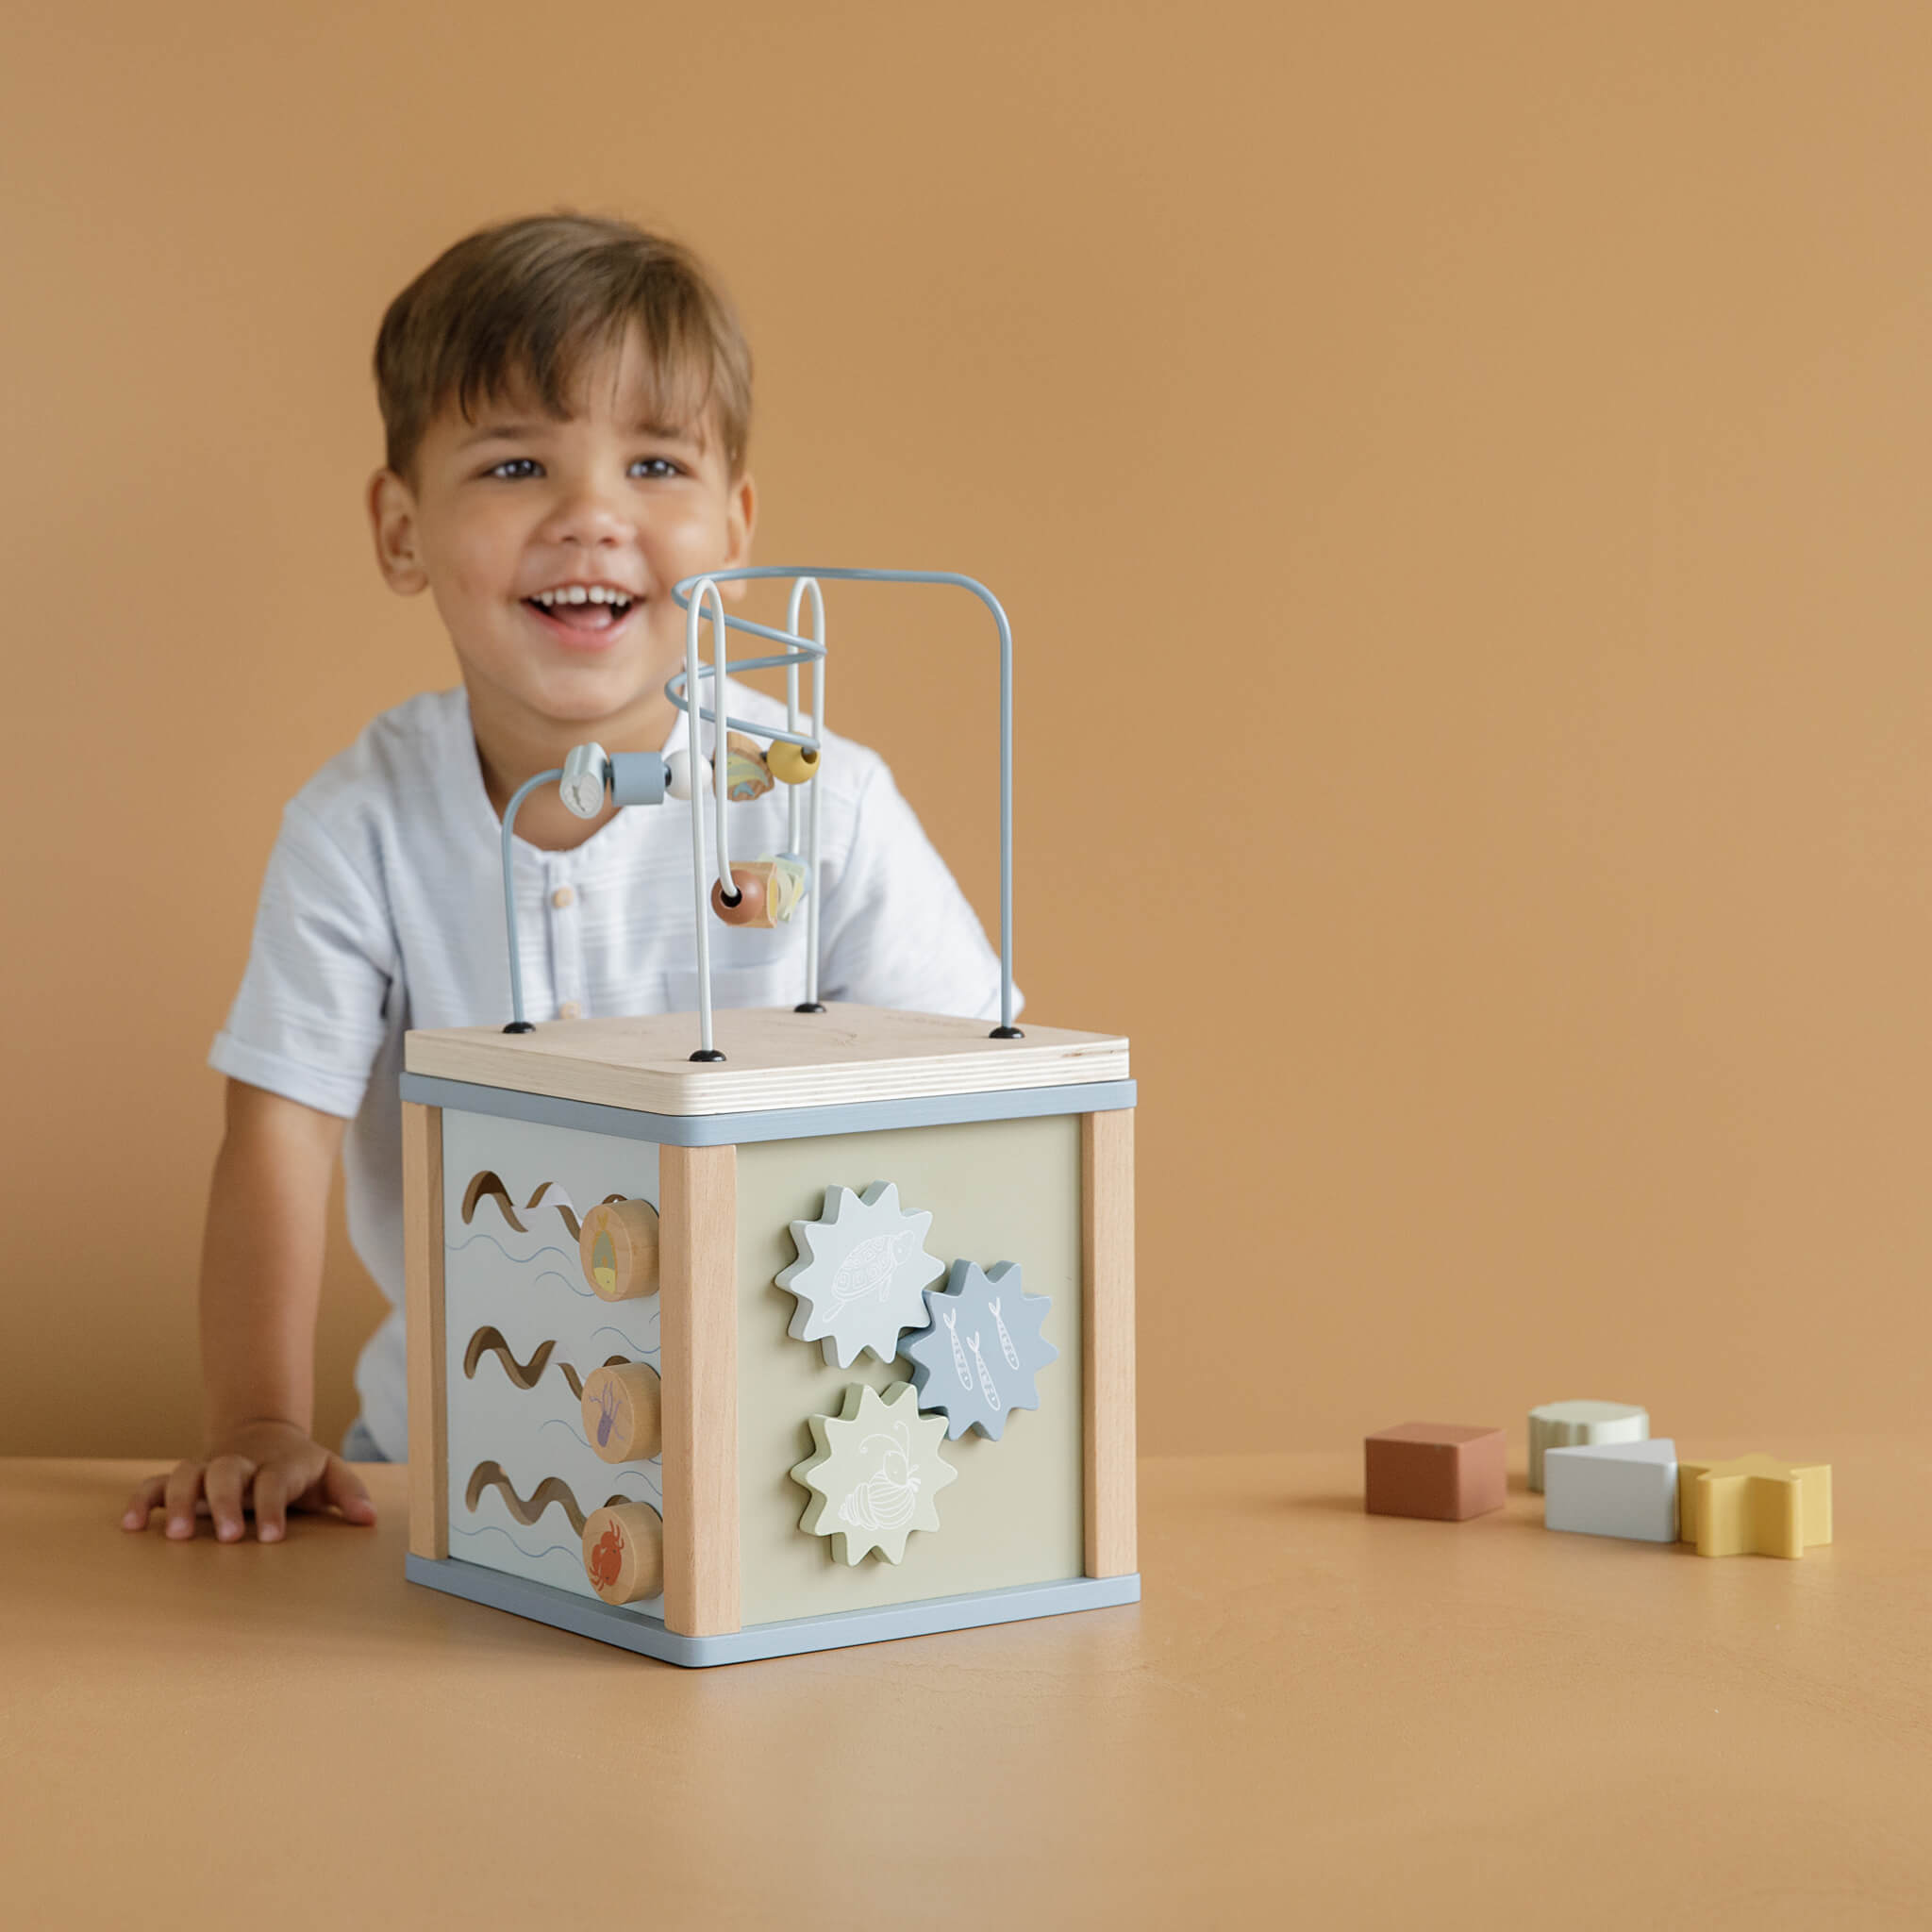 Boy Playing with Little Dutch Wooden Activity Cube Toy in Ocean Design